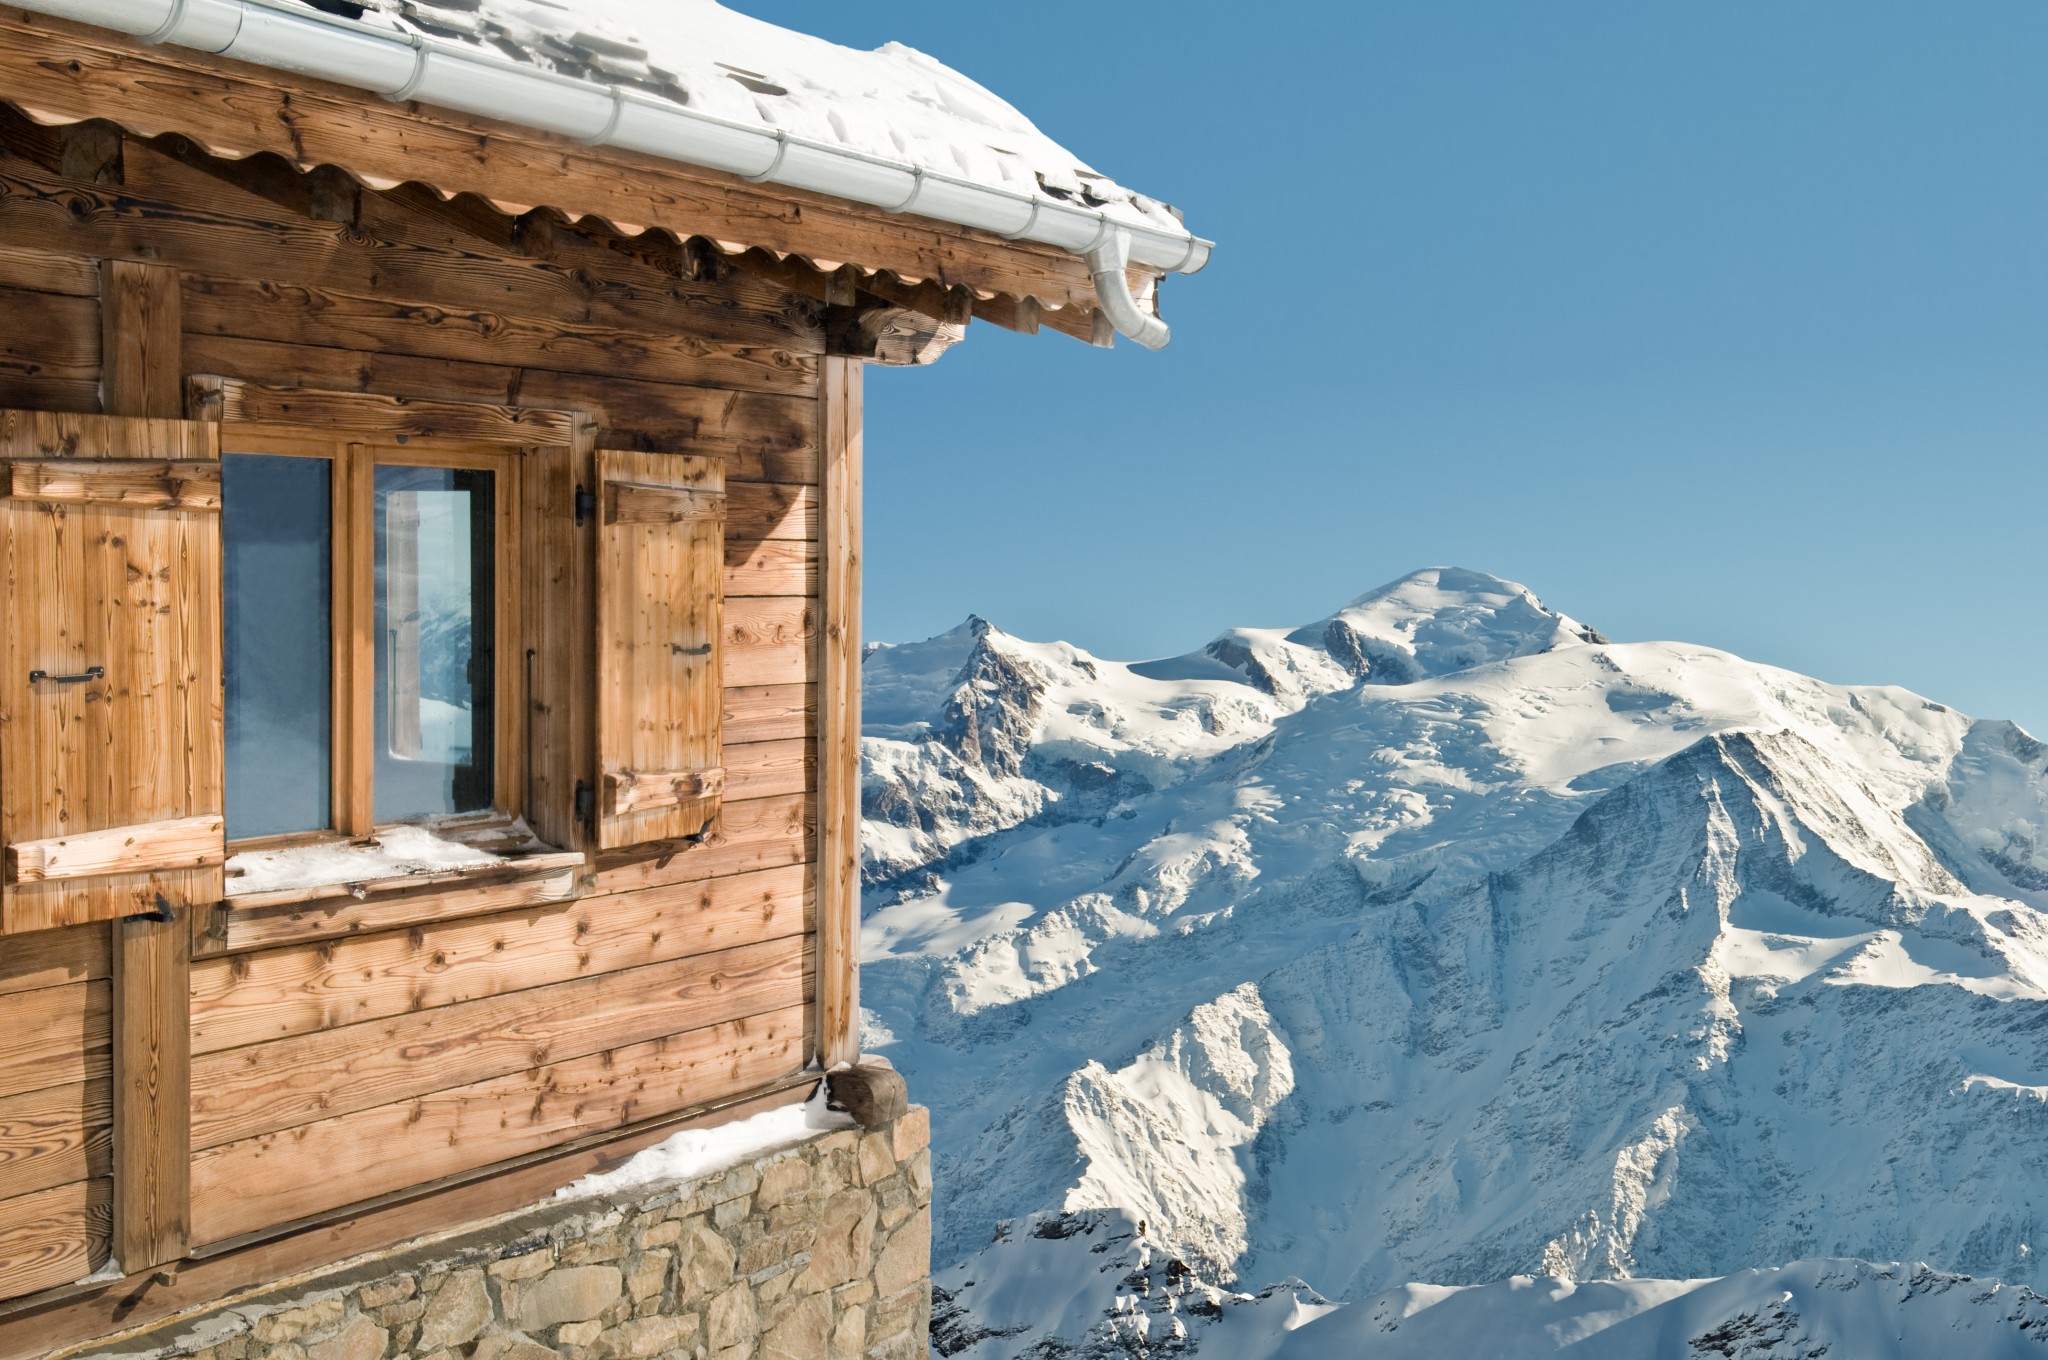 €550,000 mortgage loan to purchase a ski Châlet in the French Alps